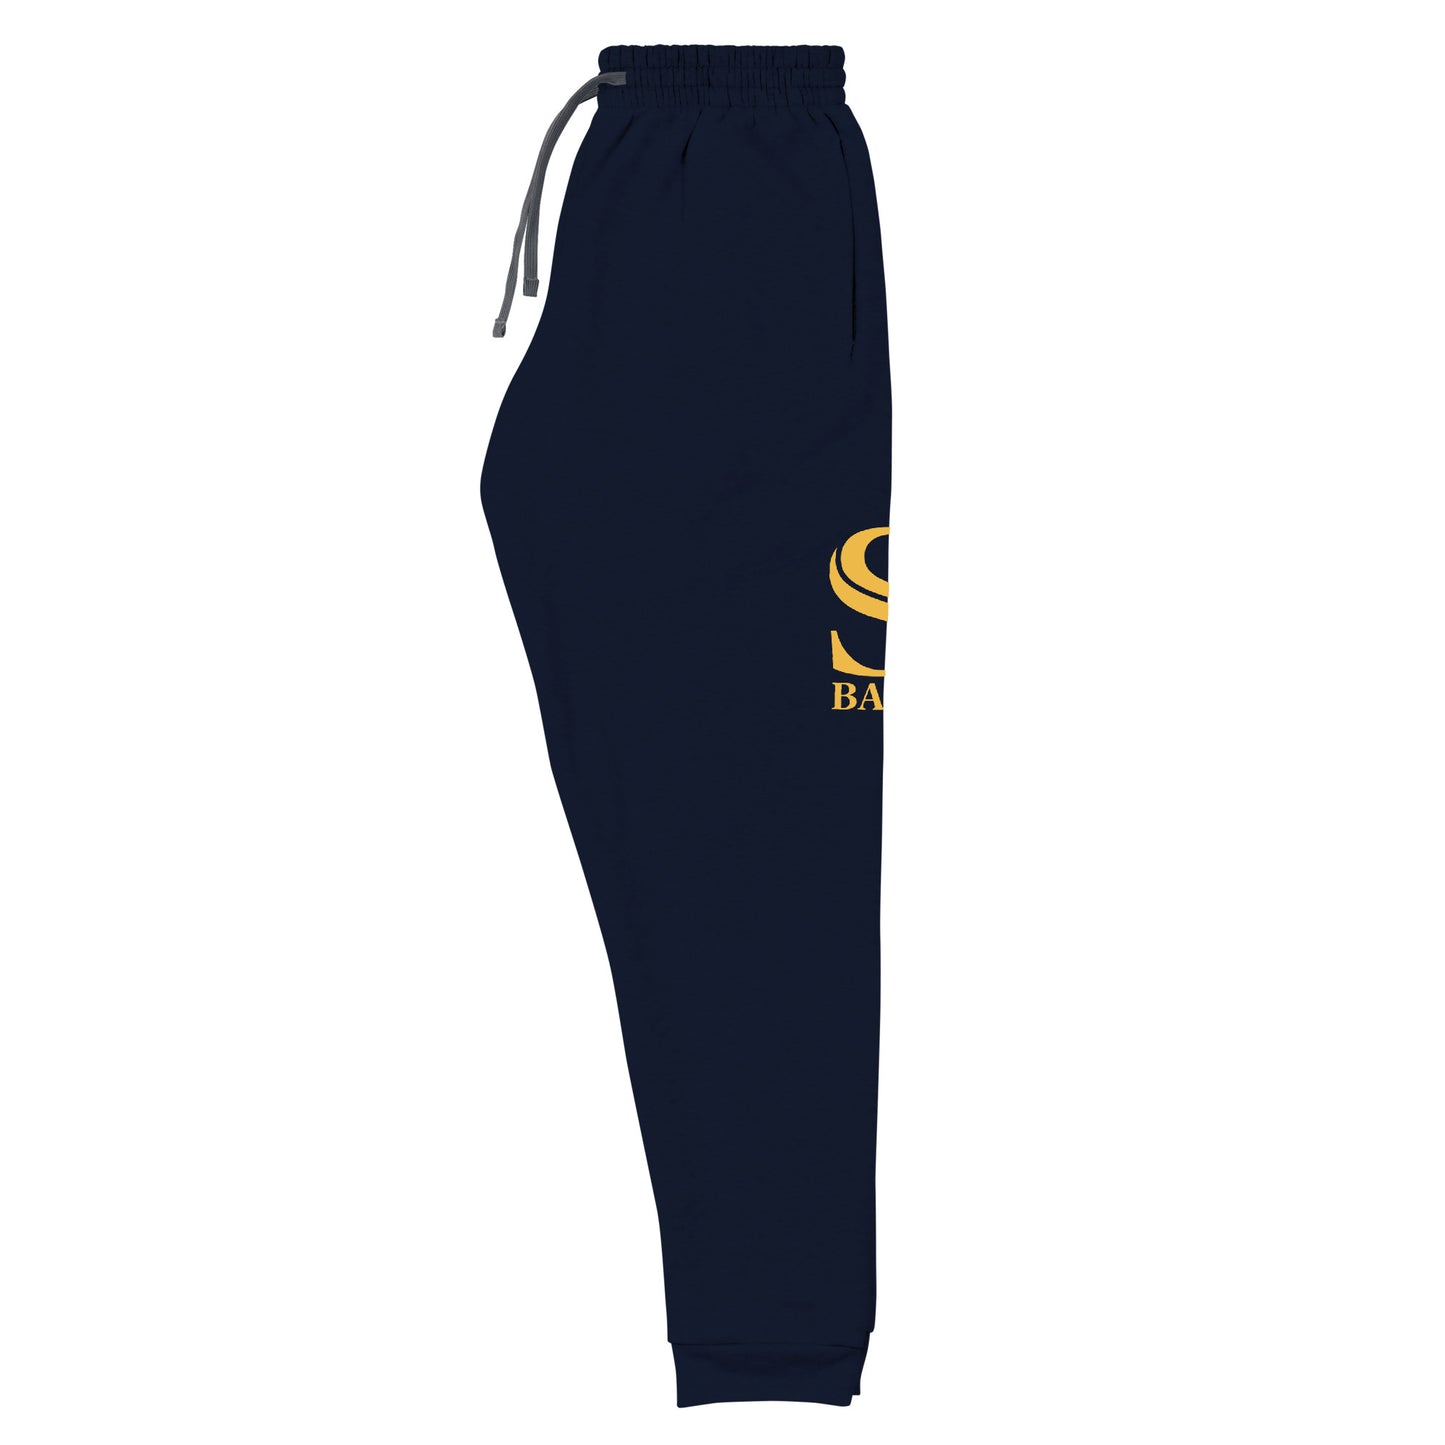 SS Band Joggers